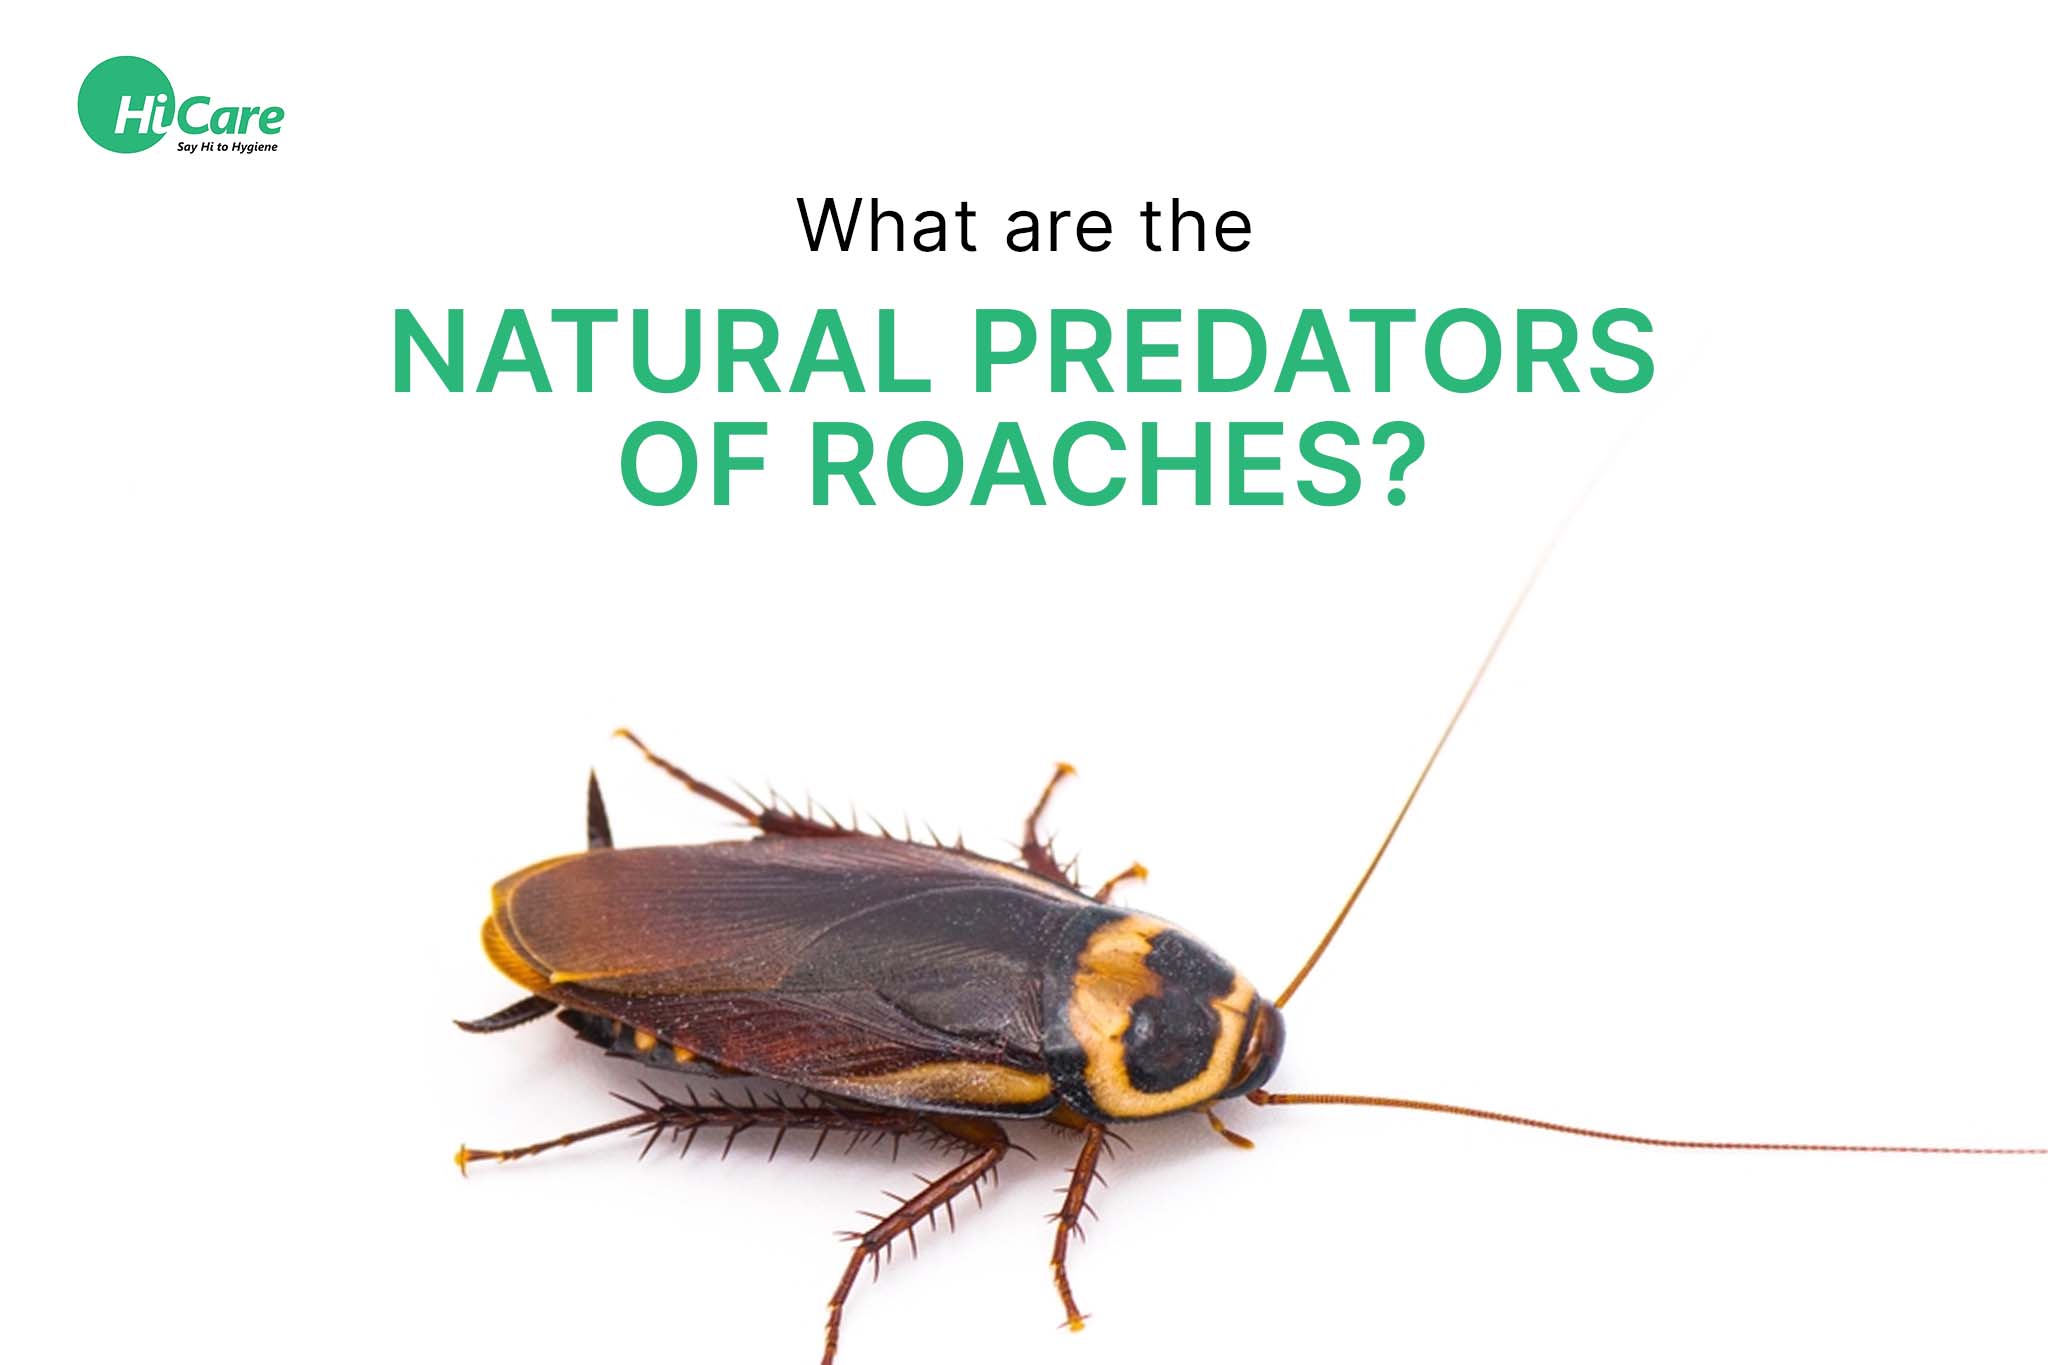 What are the Natural Predators of Roaches?